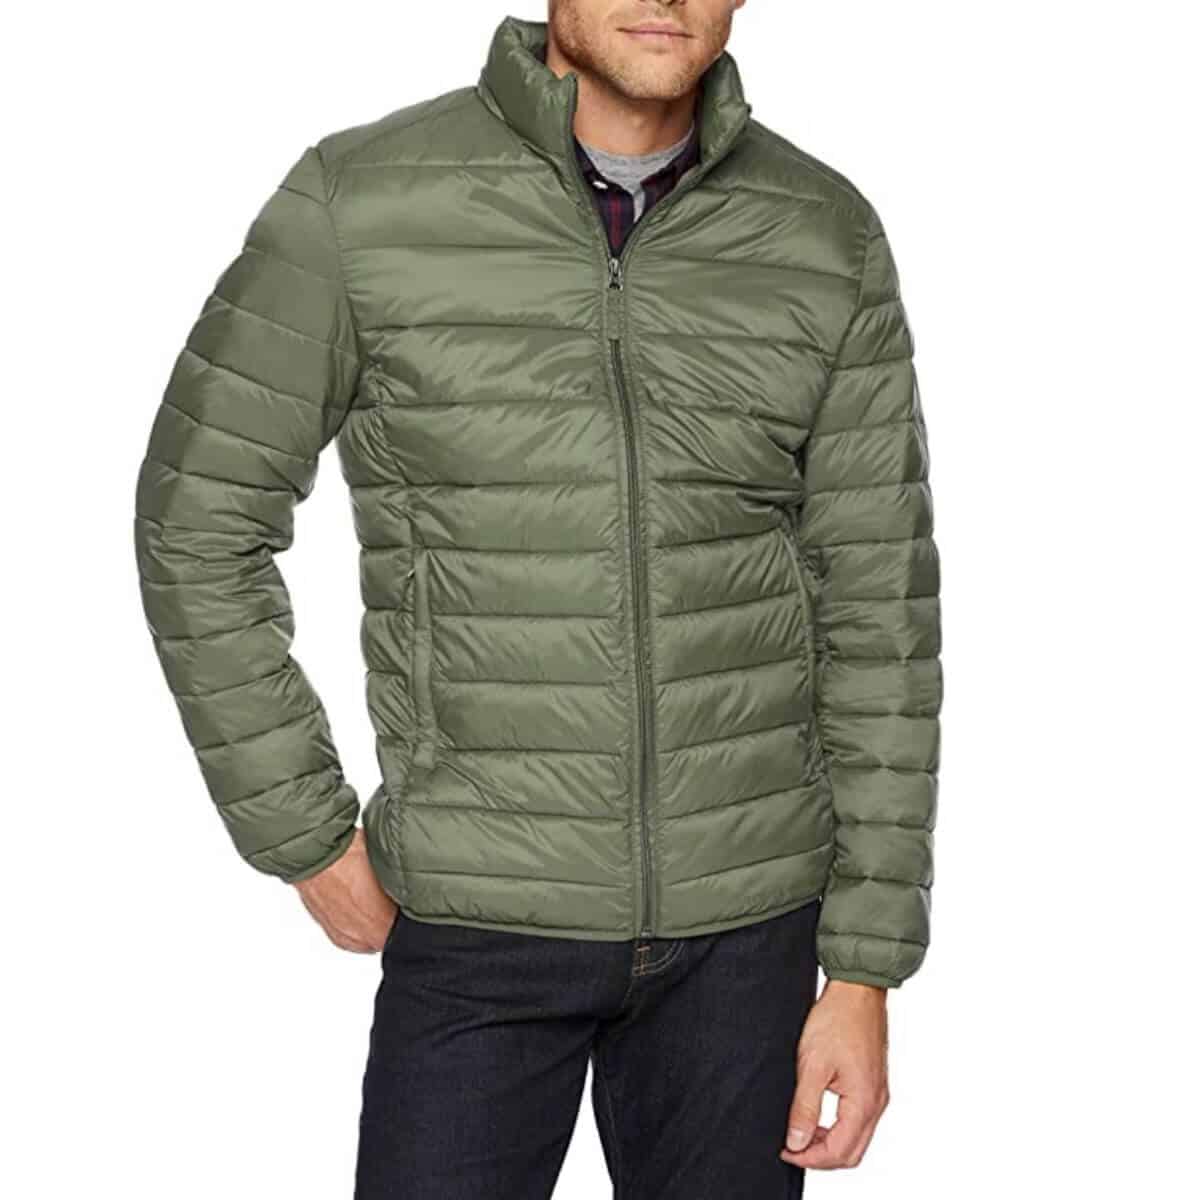 Top half of a person wearing an olive green puffer jacket with dark jeans.